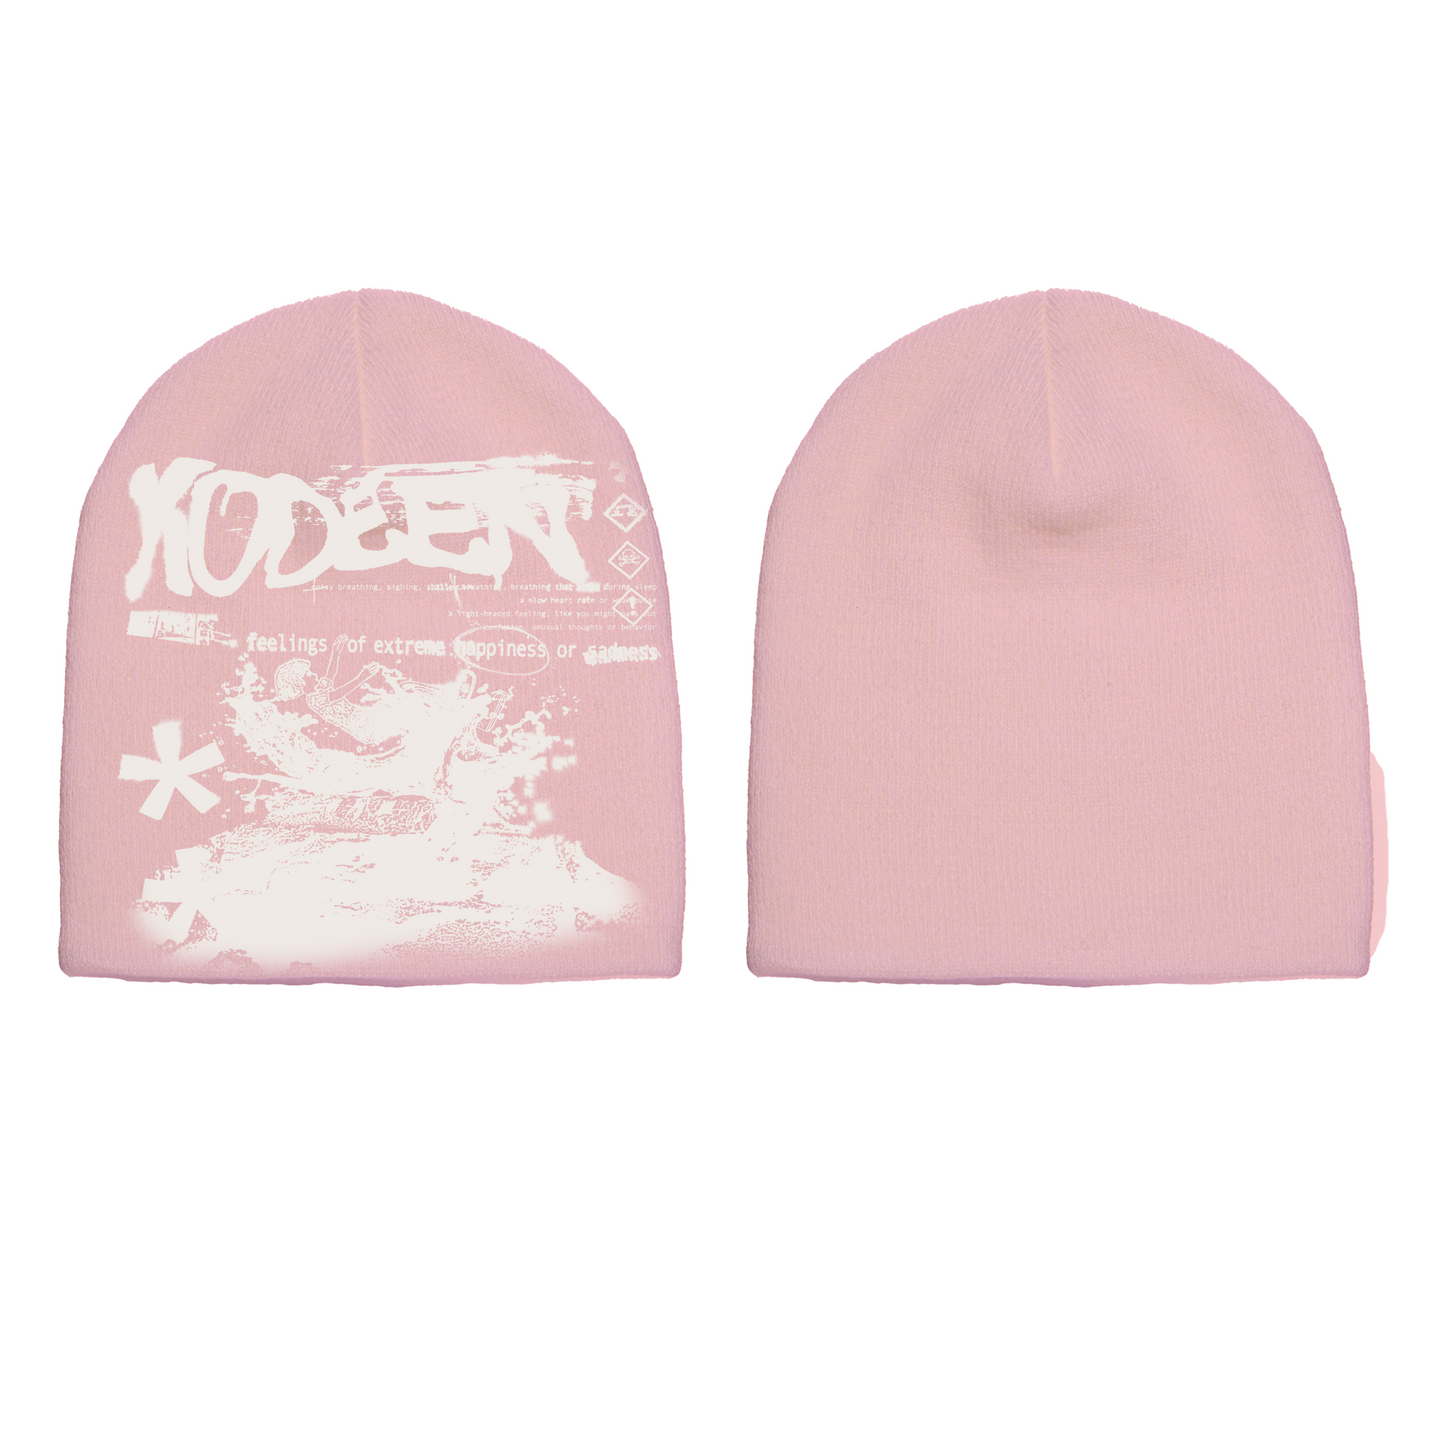 KODEEN* Confused Confessions Beanie